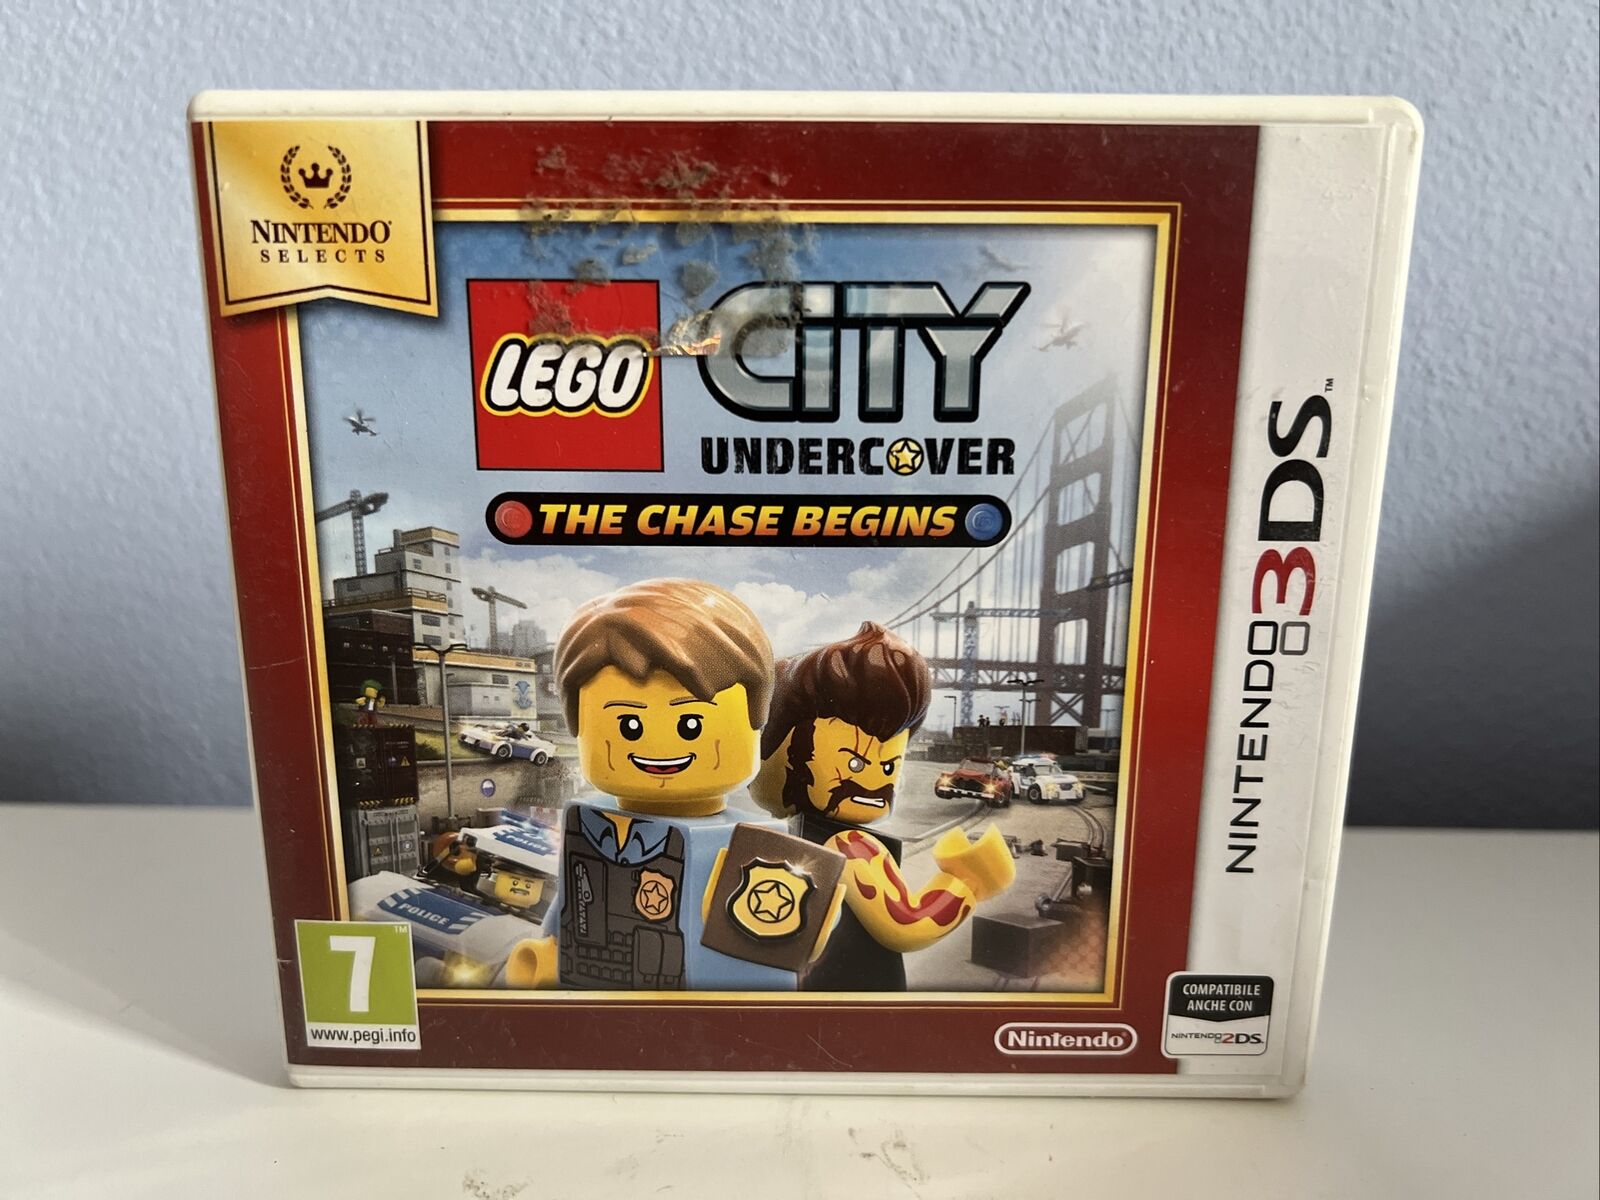 Nintendo-3DS2DS-Videogioco-Lego-City-Undercover-The-Chase-Begins-133908422030